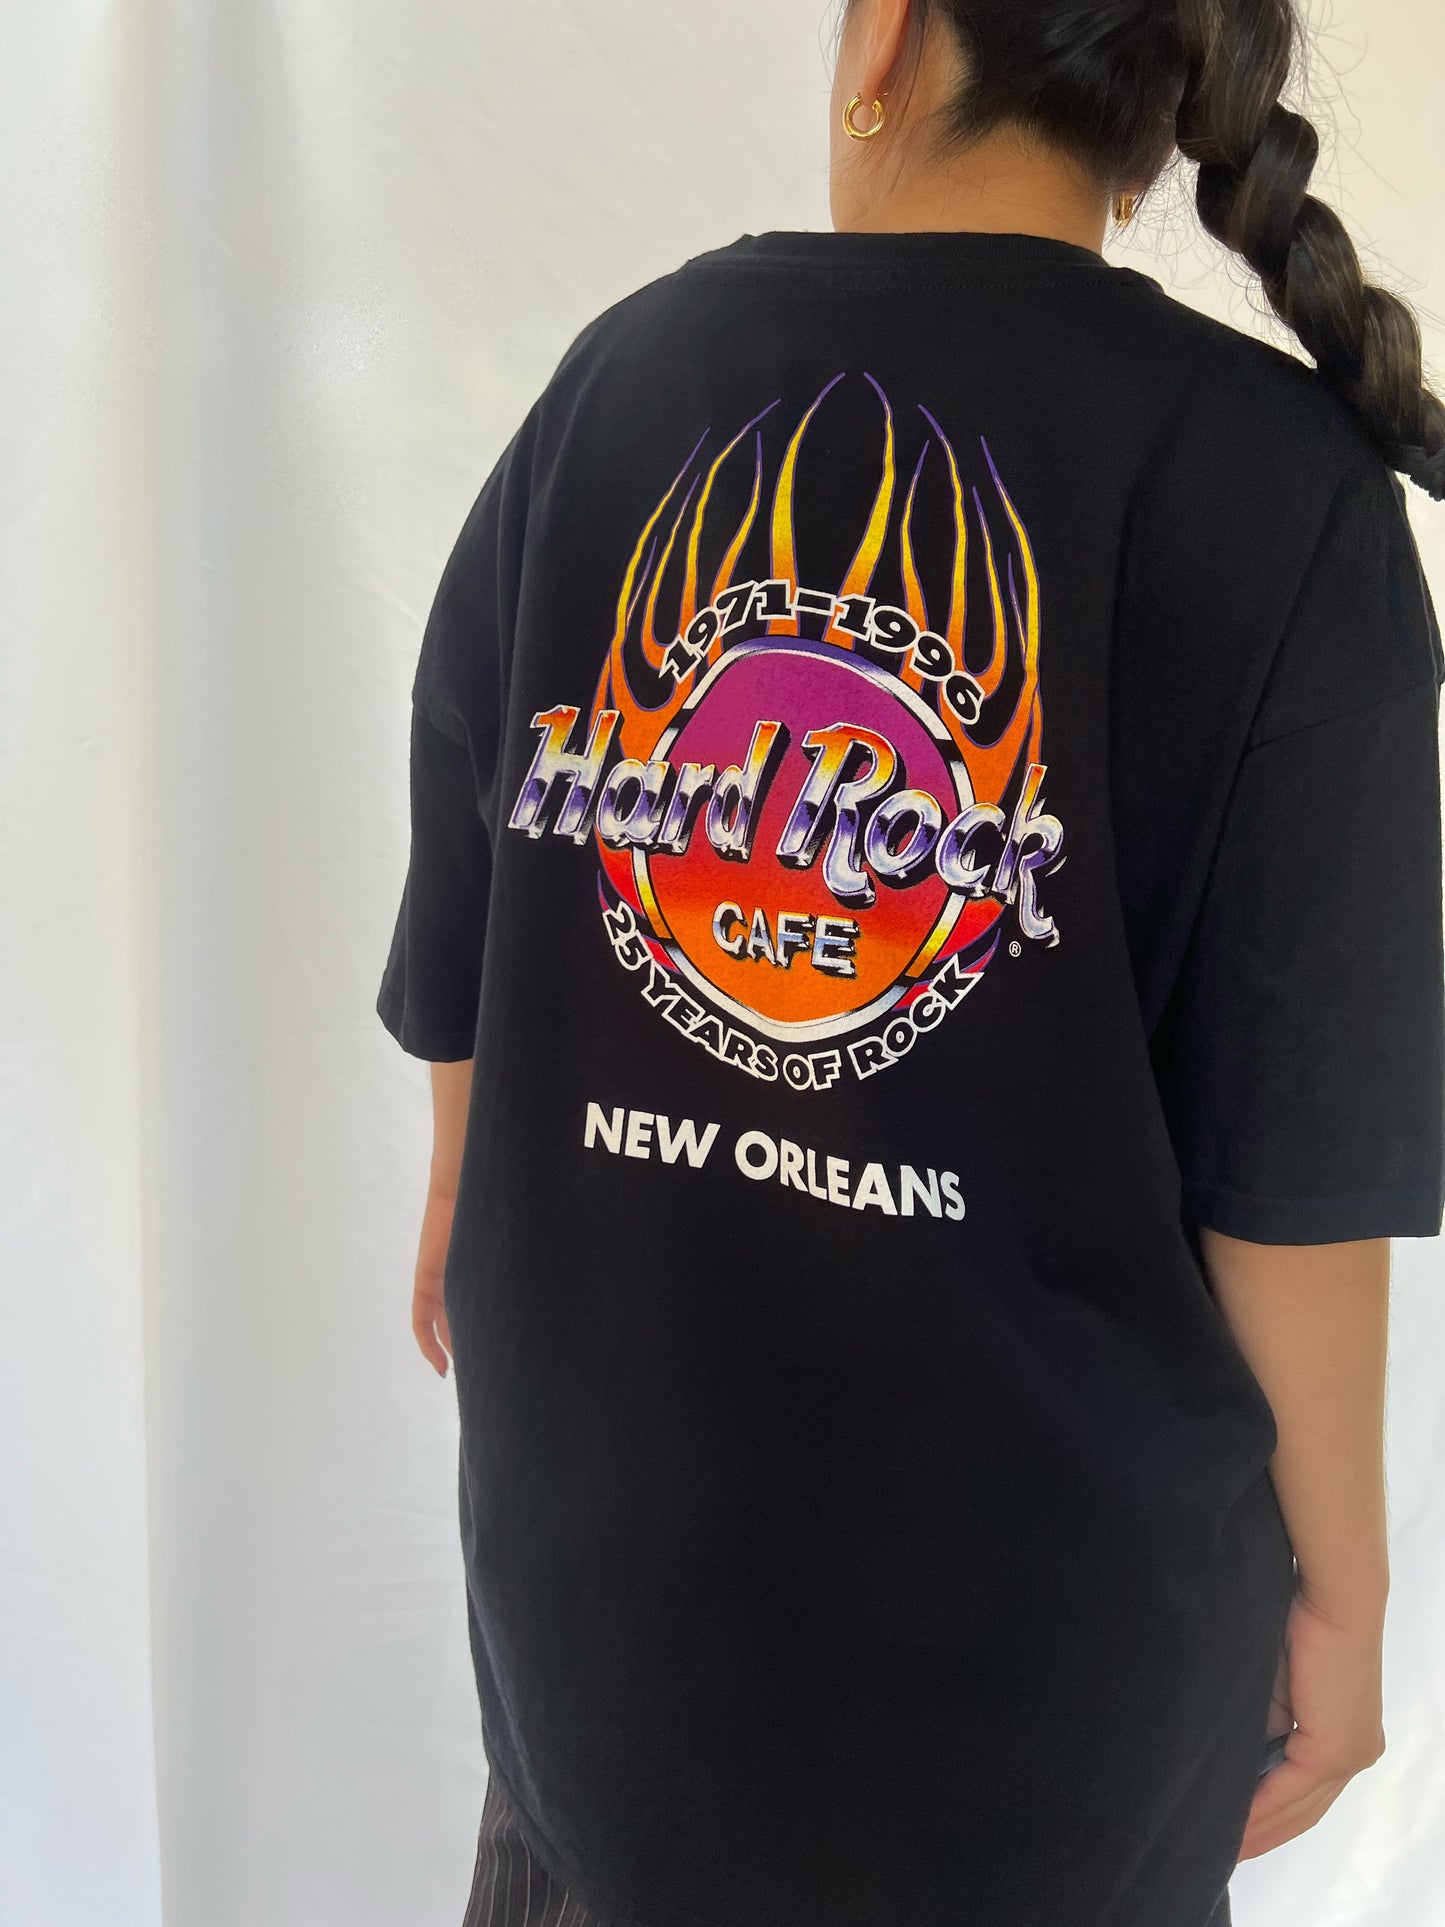 '96 Hard Rock Cafe New Orleans Tee - 2XL